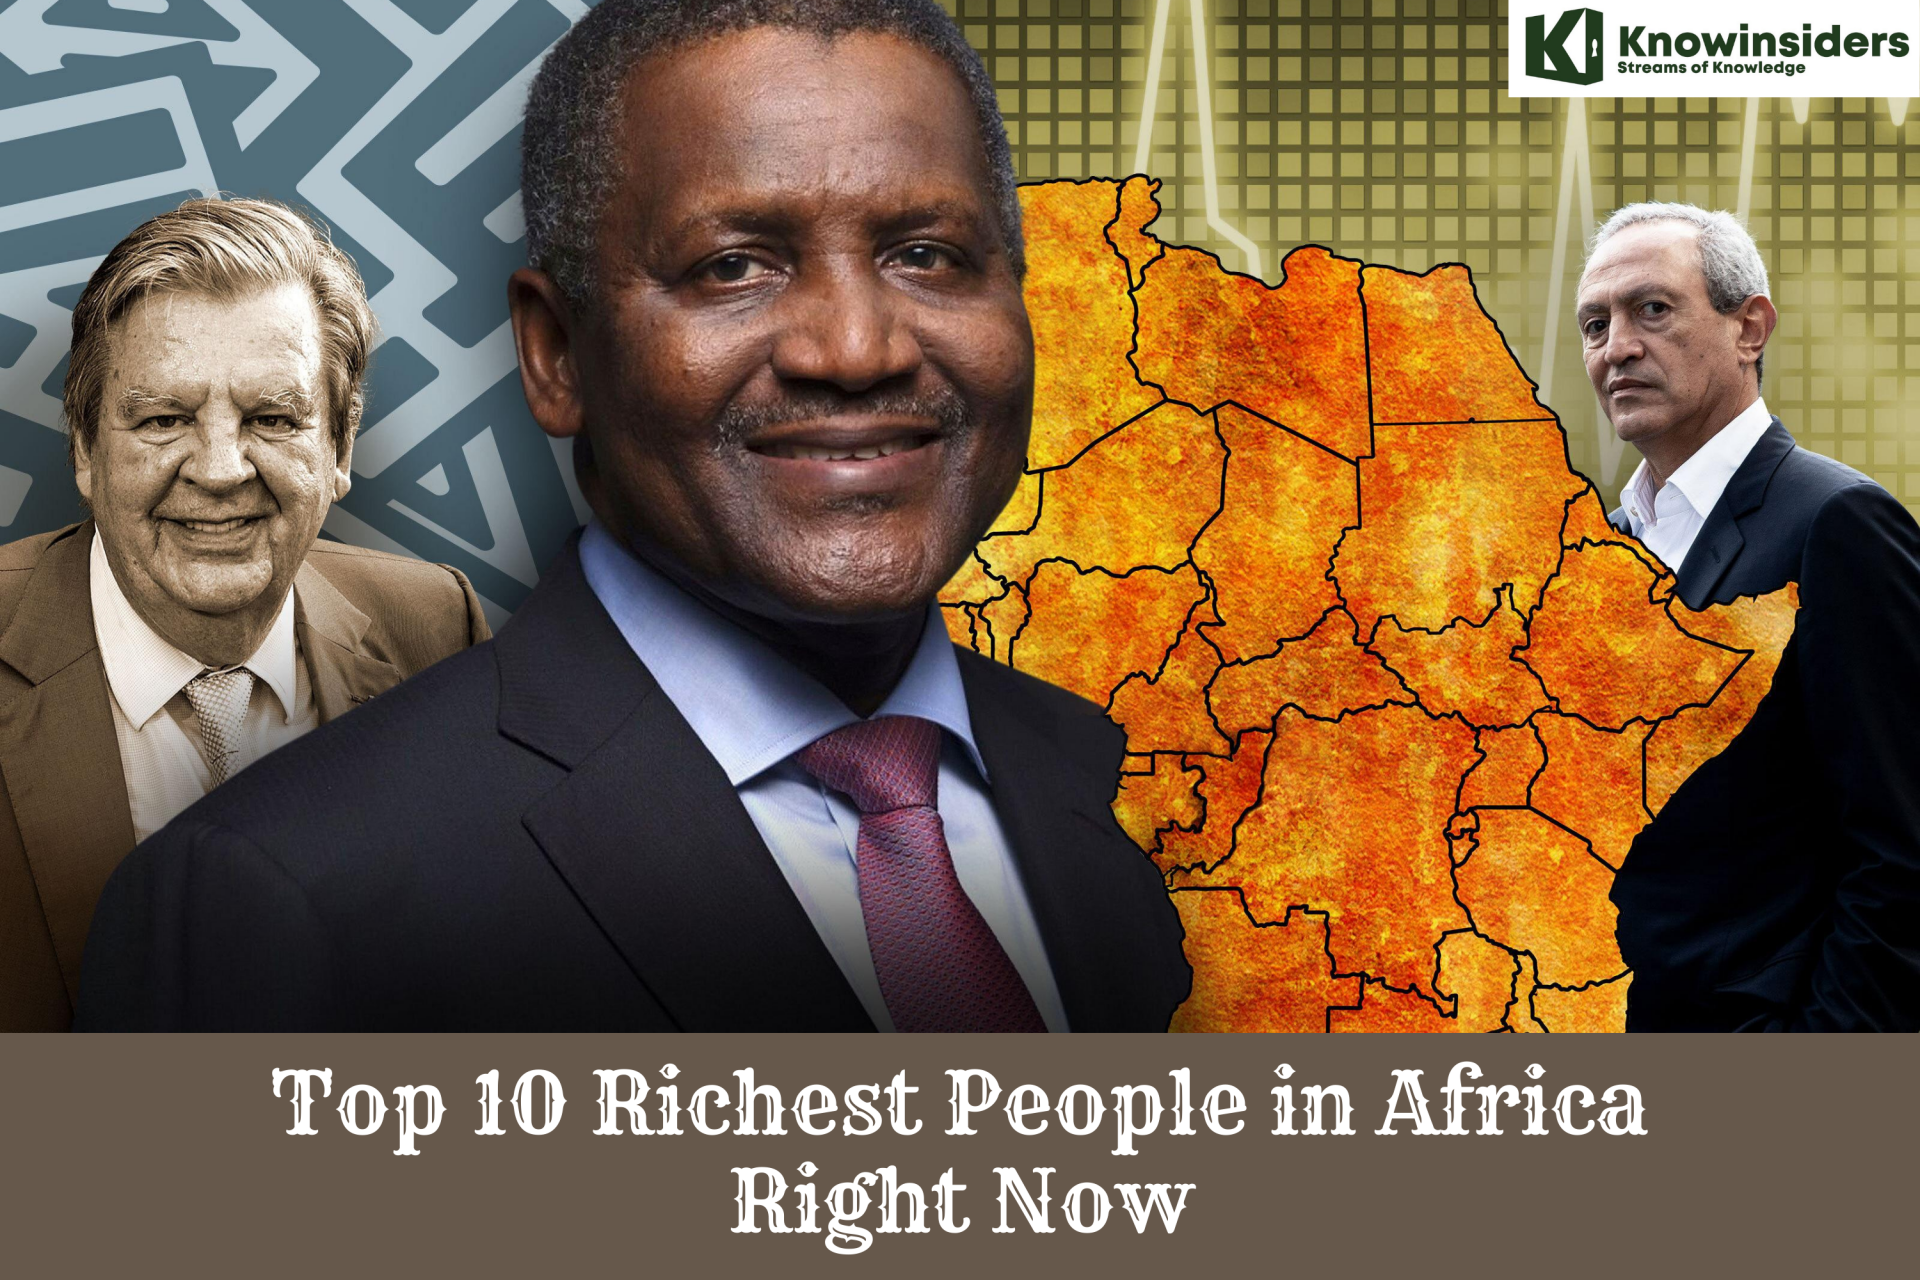 Top 10 Richest People in Africa - Ranked by Forbes